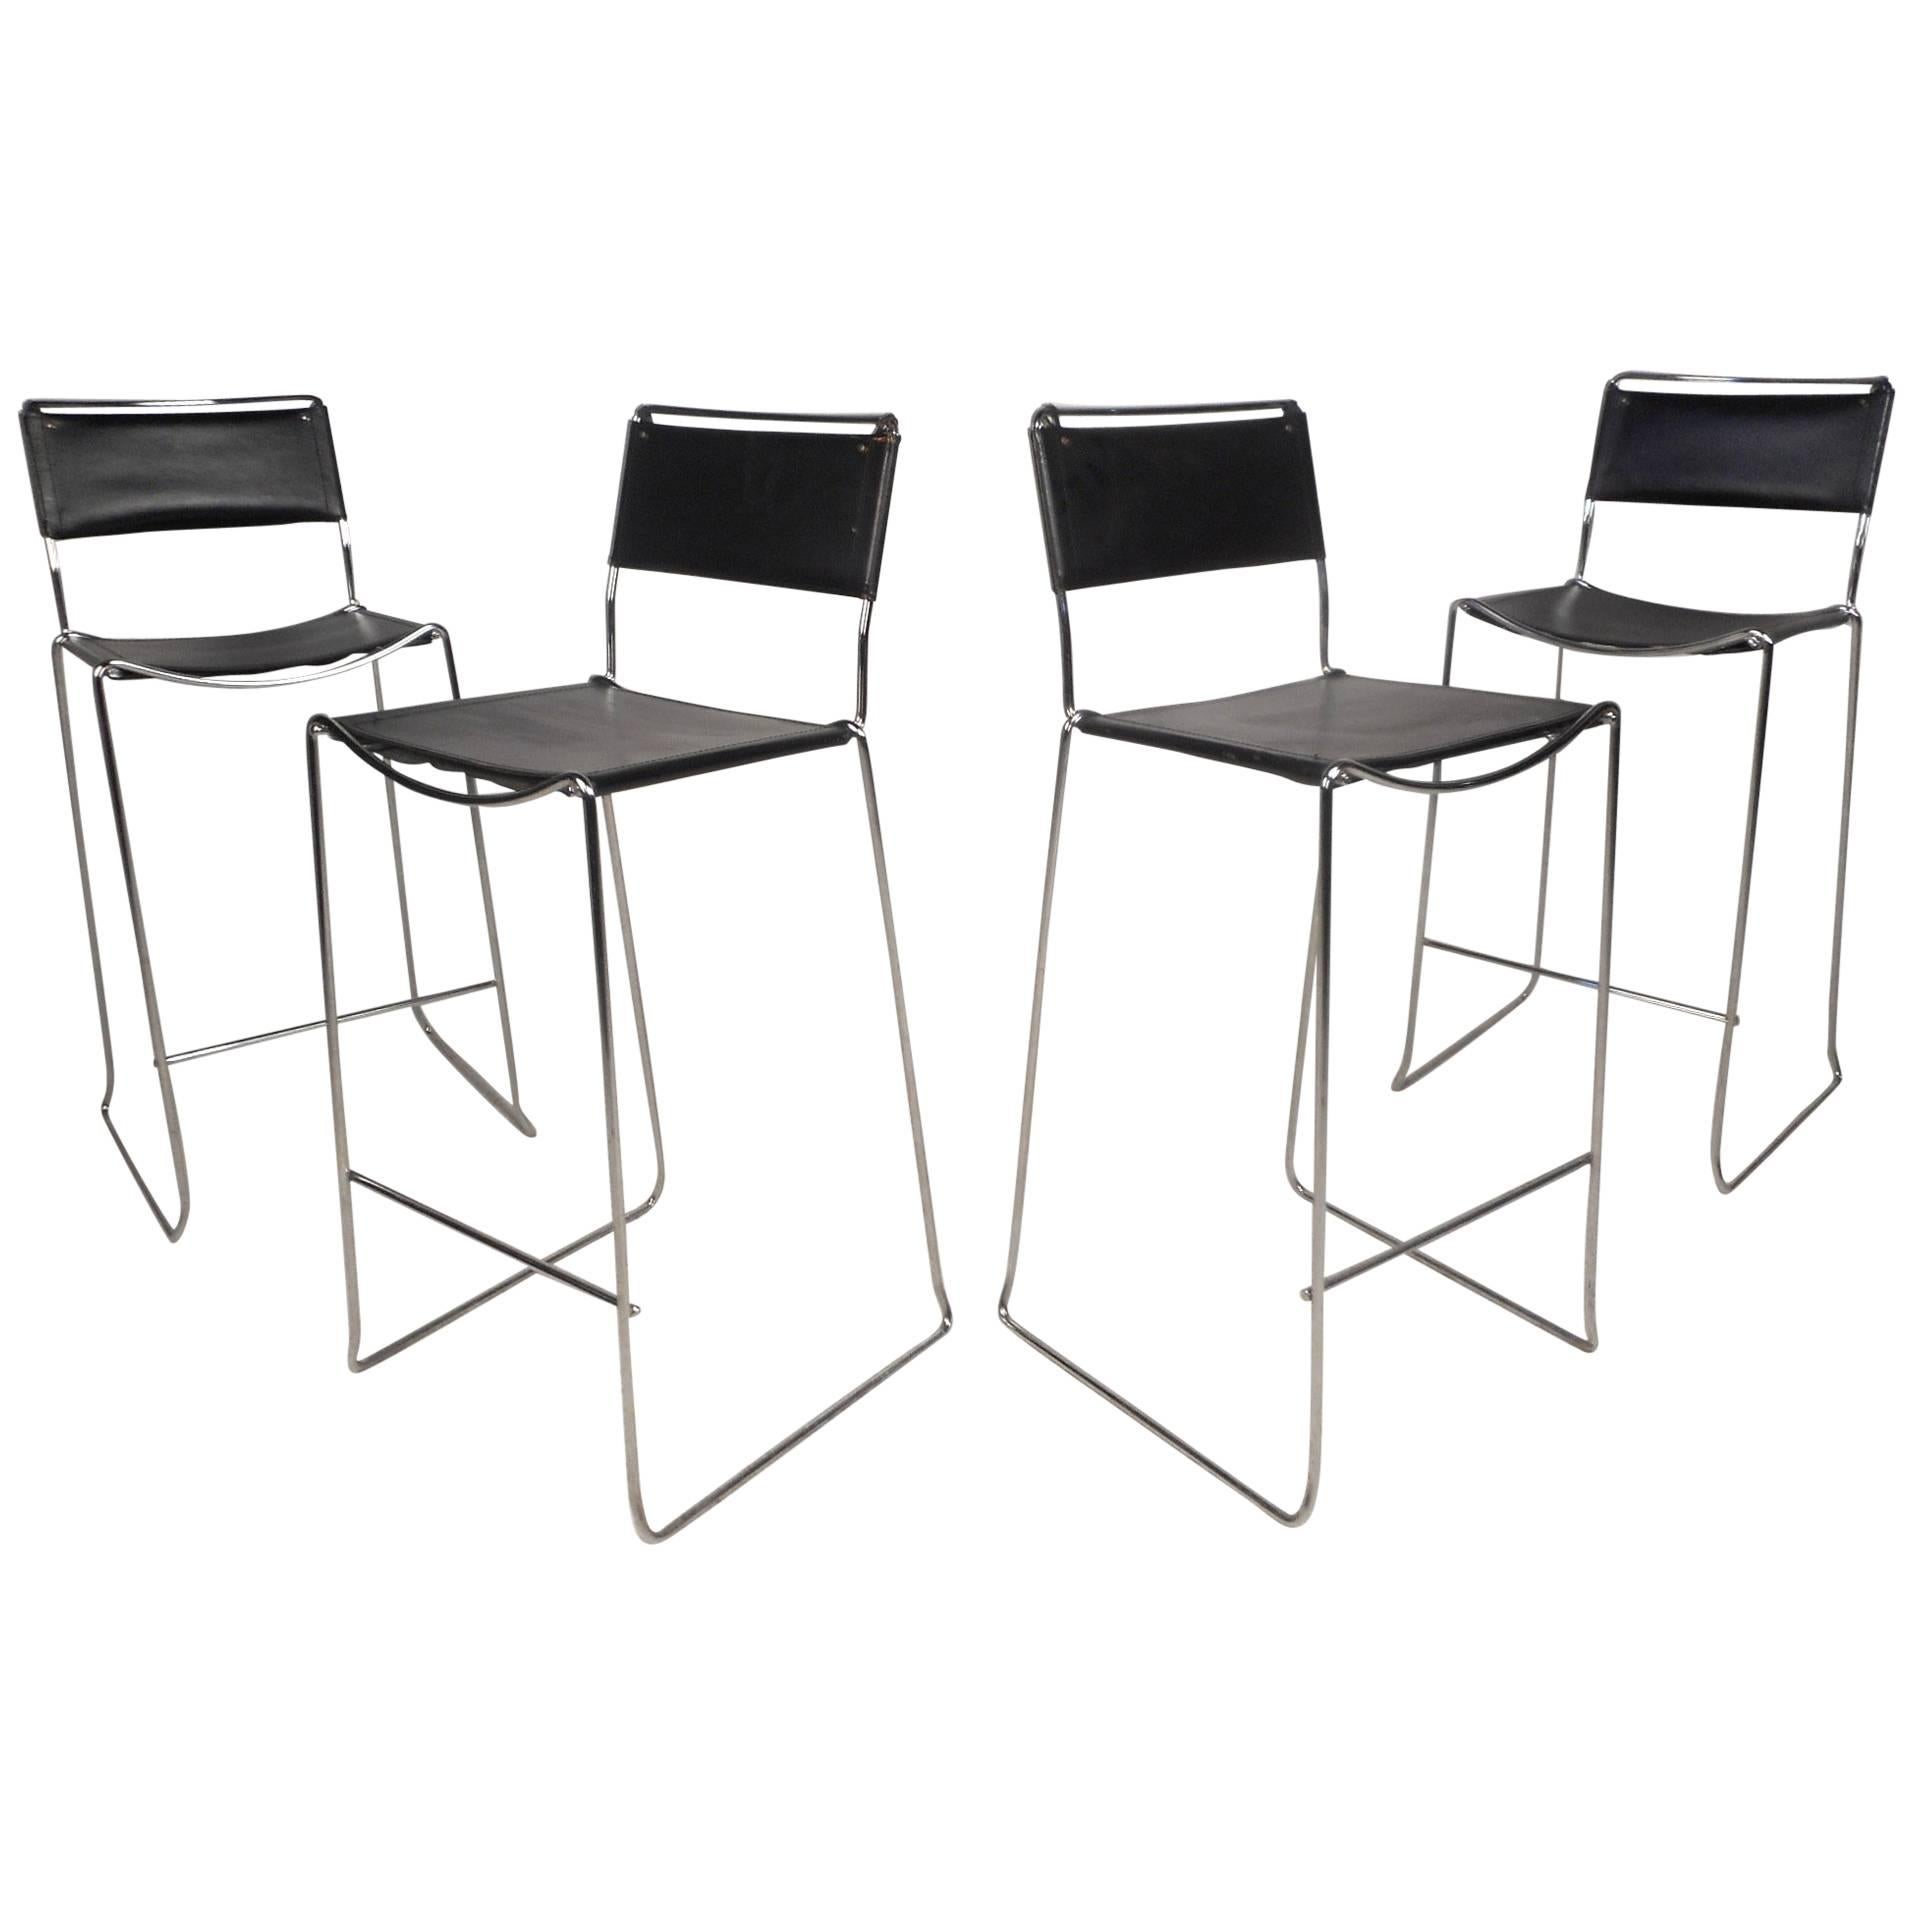 Set of Four Modern Leather and Chrome Bar Stools